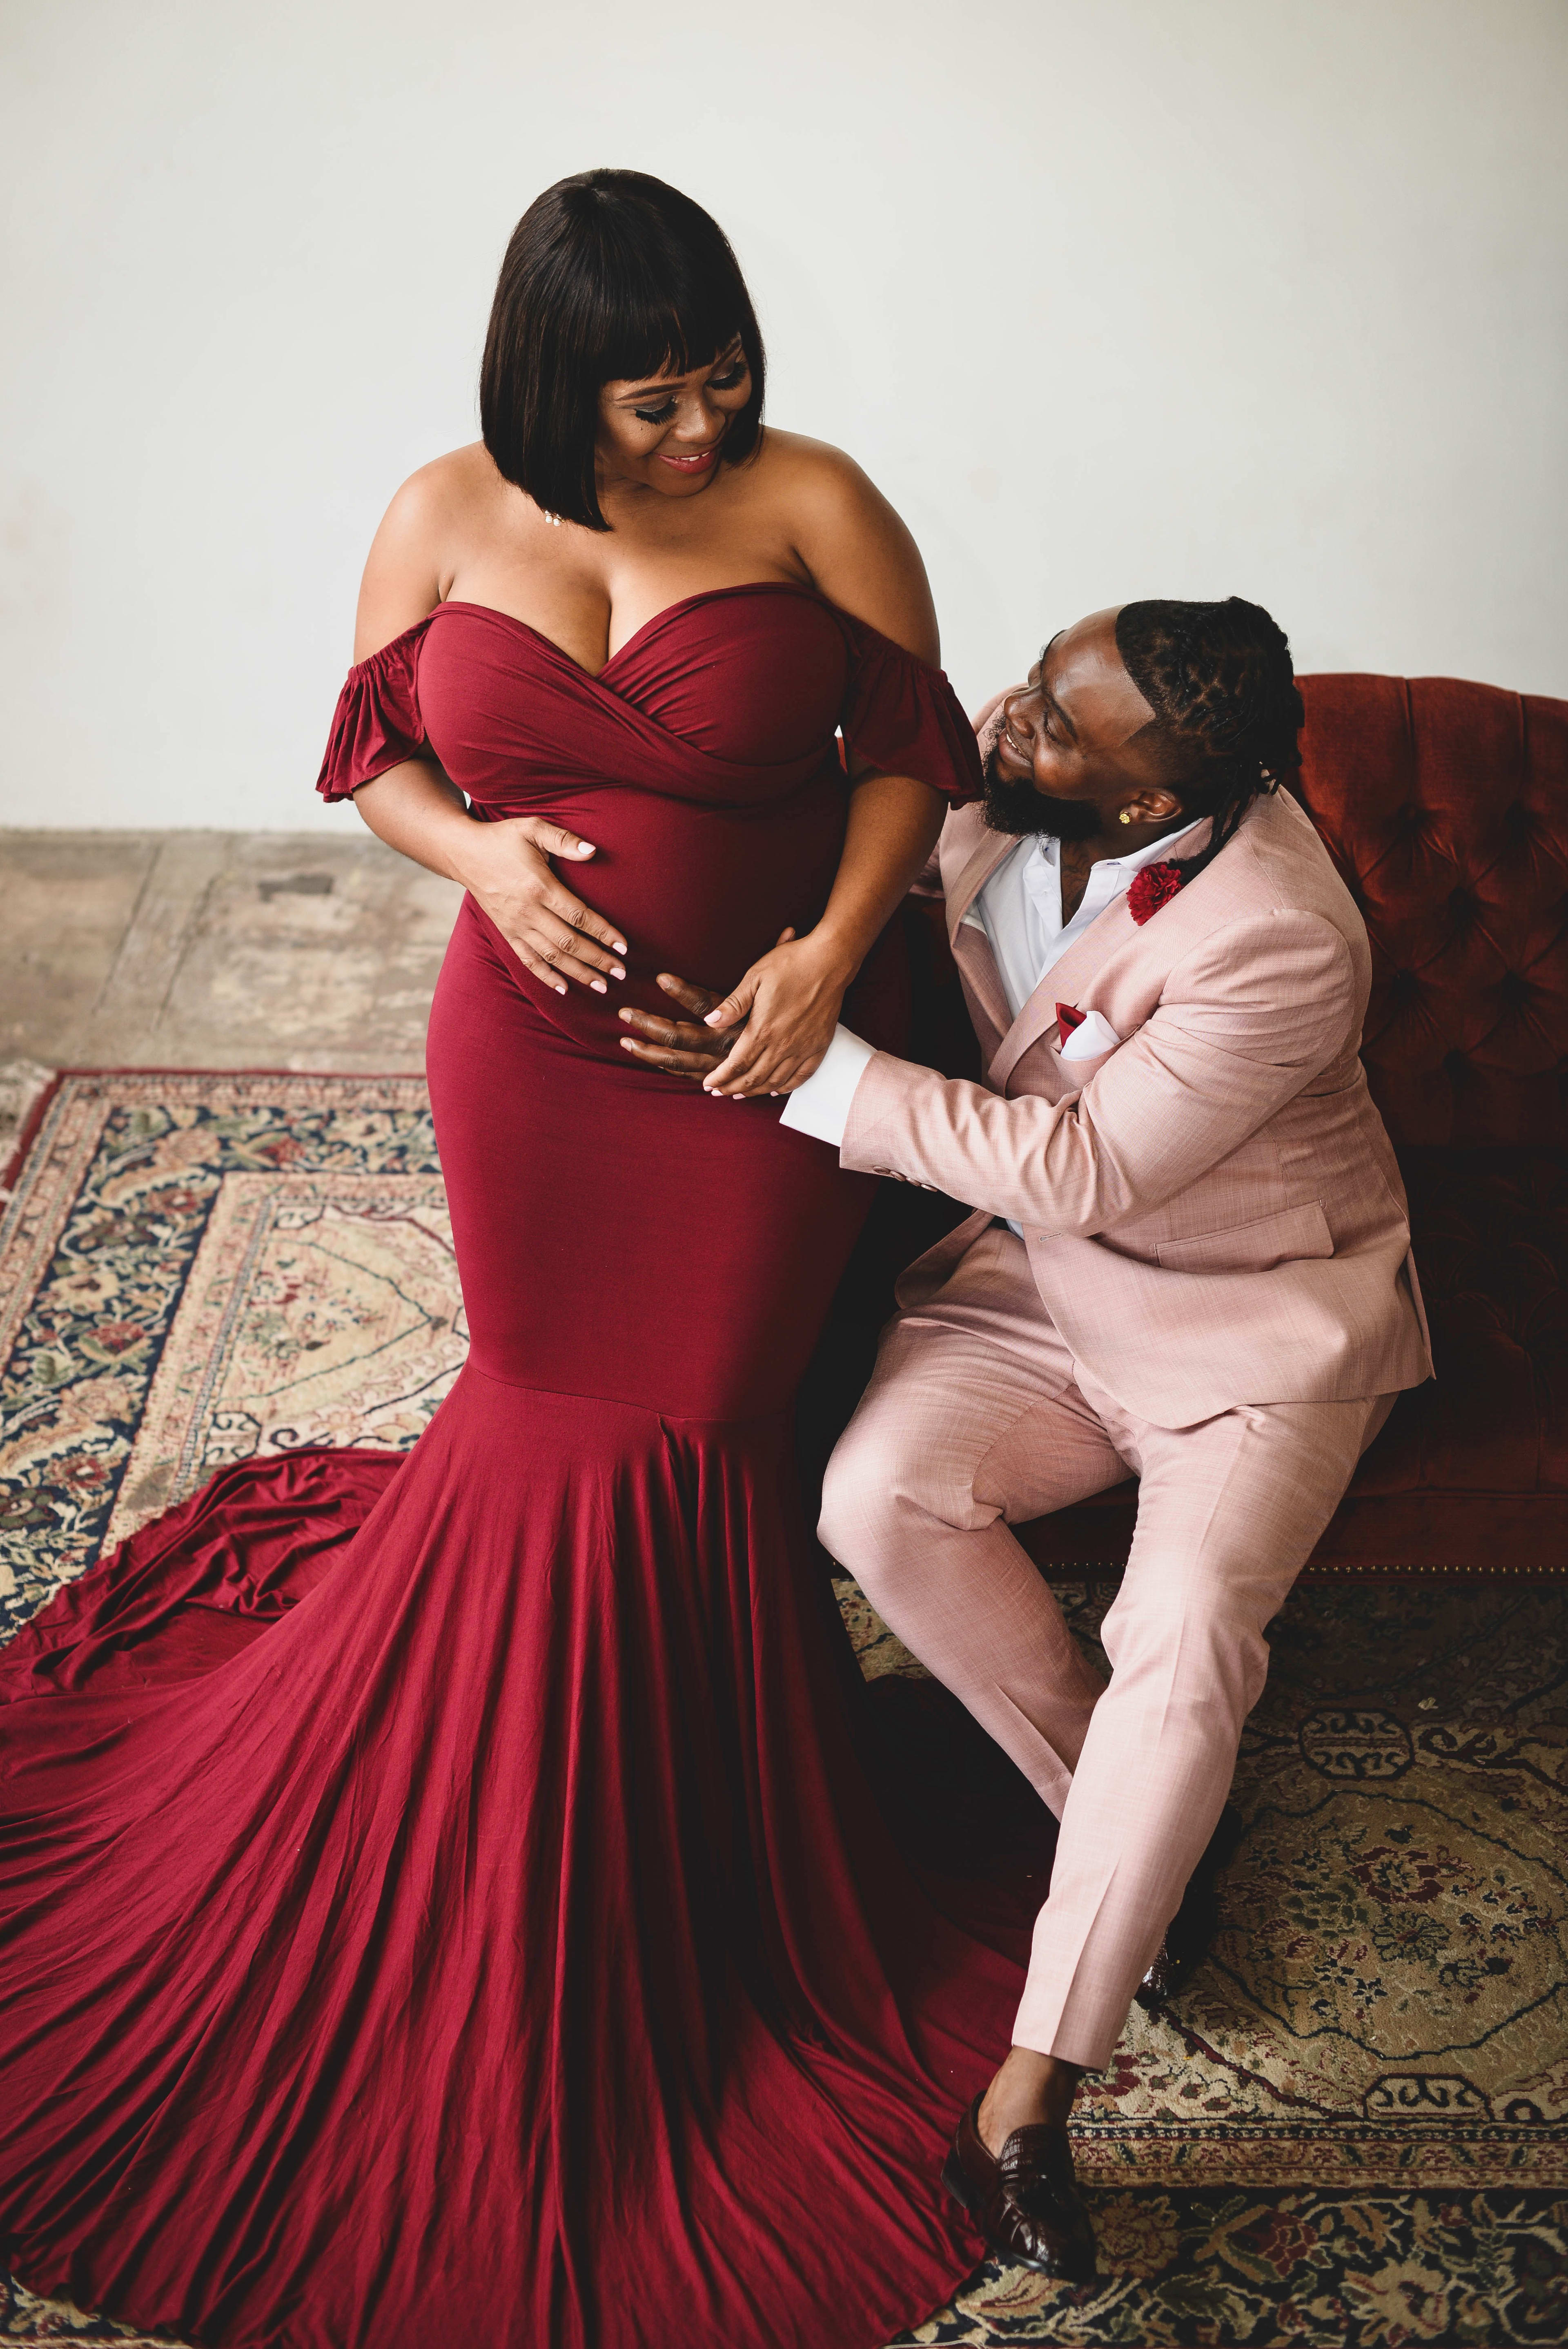 A pregnant woman and her partner posing in a red dress and pink suit for a maternity photoshoot.